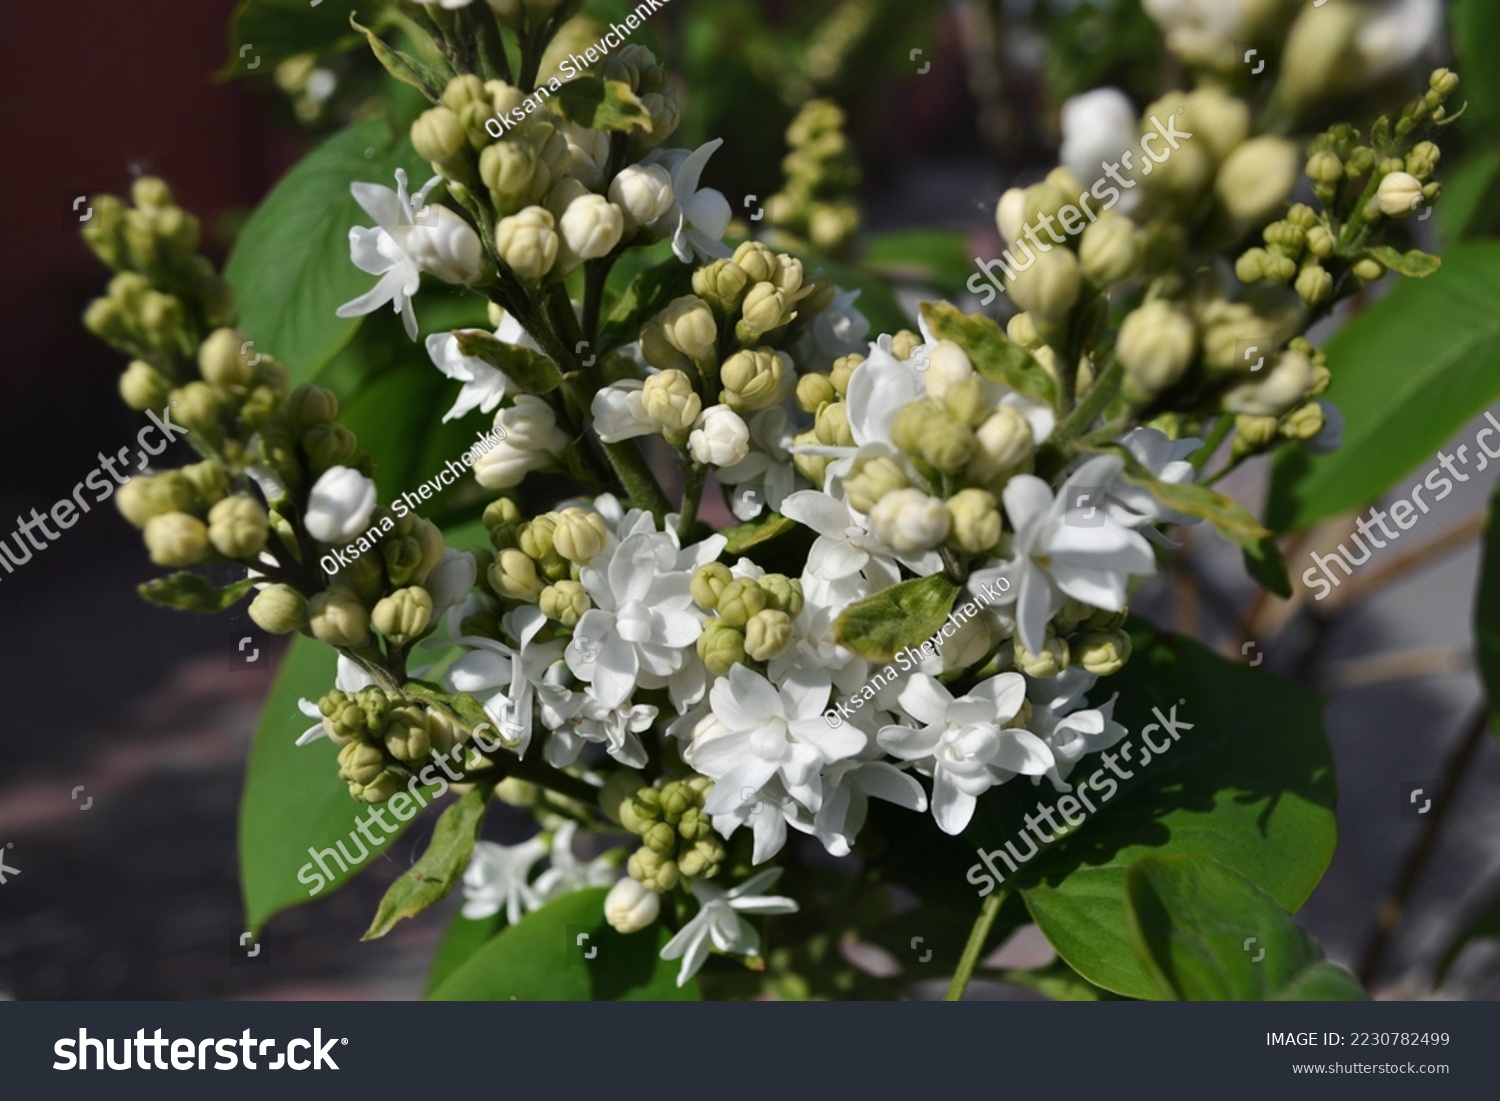 Macro photo of  beautiful double-white flowers and lemon-yellow buds of the  Syringa (lilac), growing outdoor. Flowering woody plant in a garden #2230782499